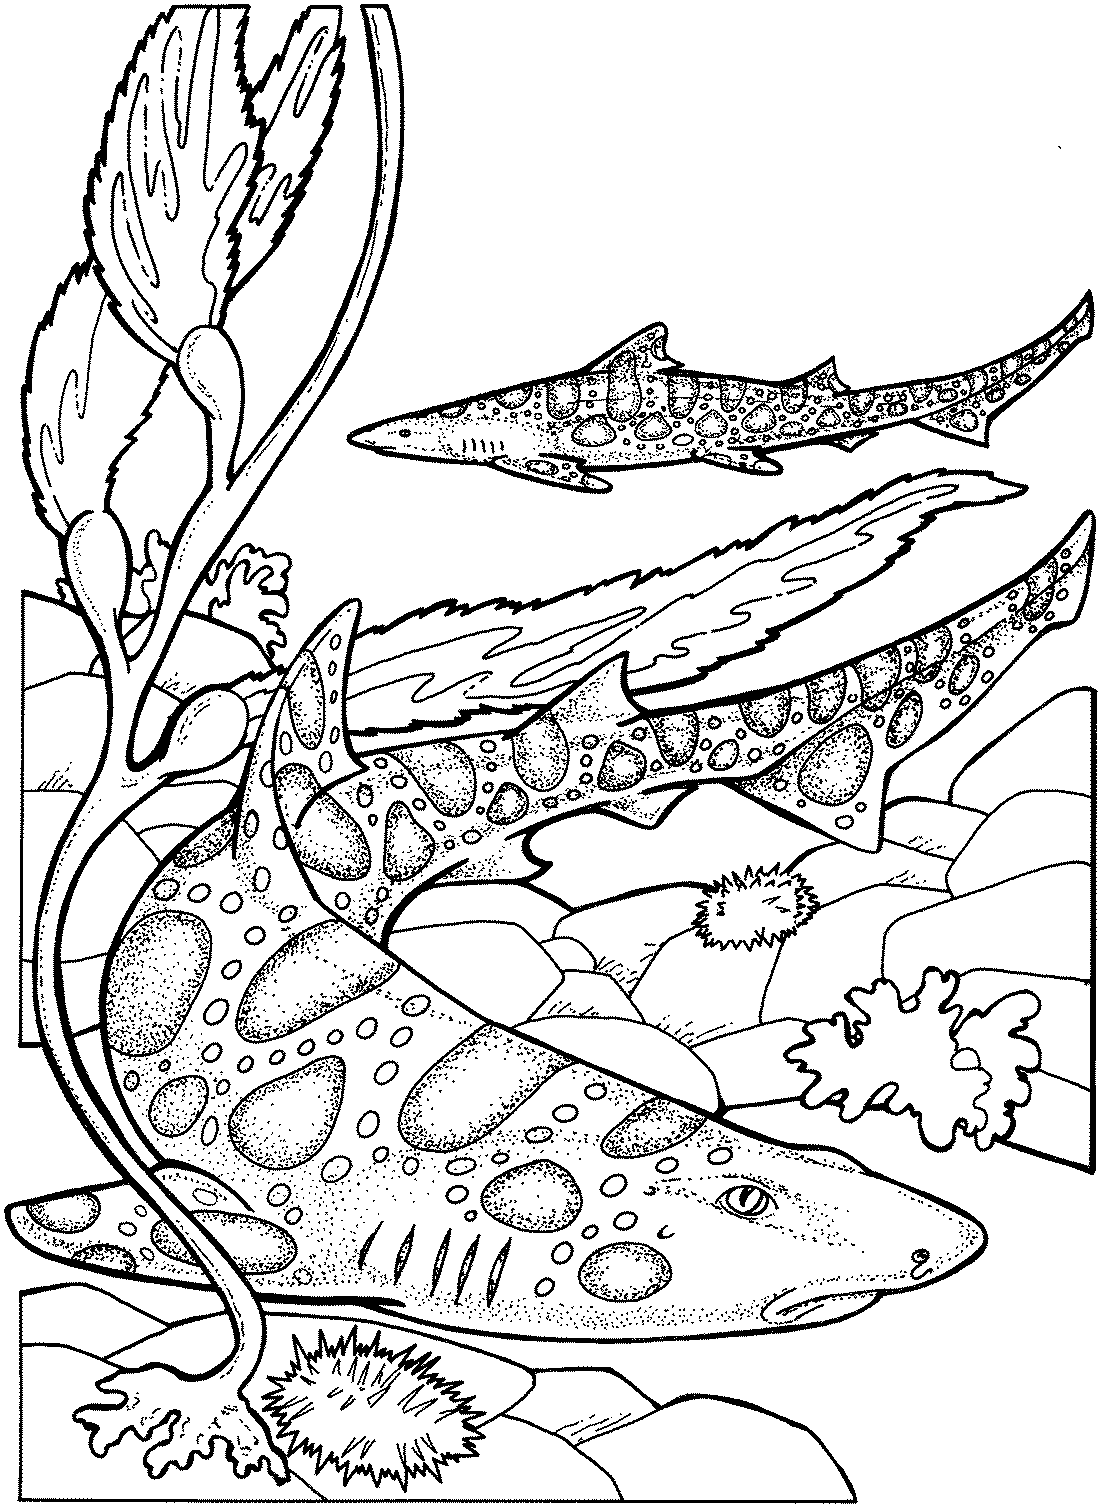 sharks coloring pages shark coloring pages to download and print for free sharks pages coloring 